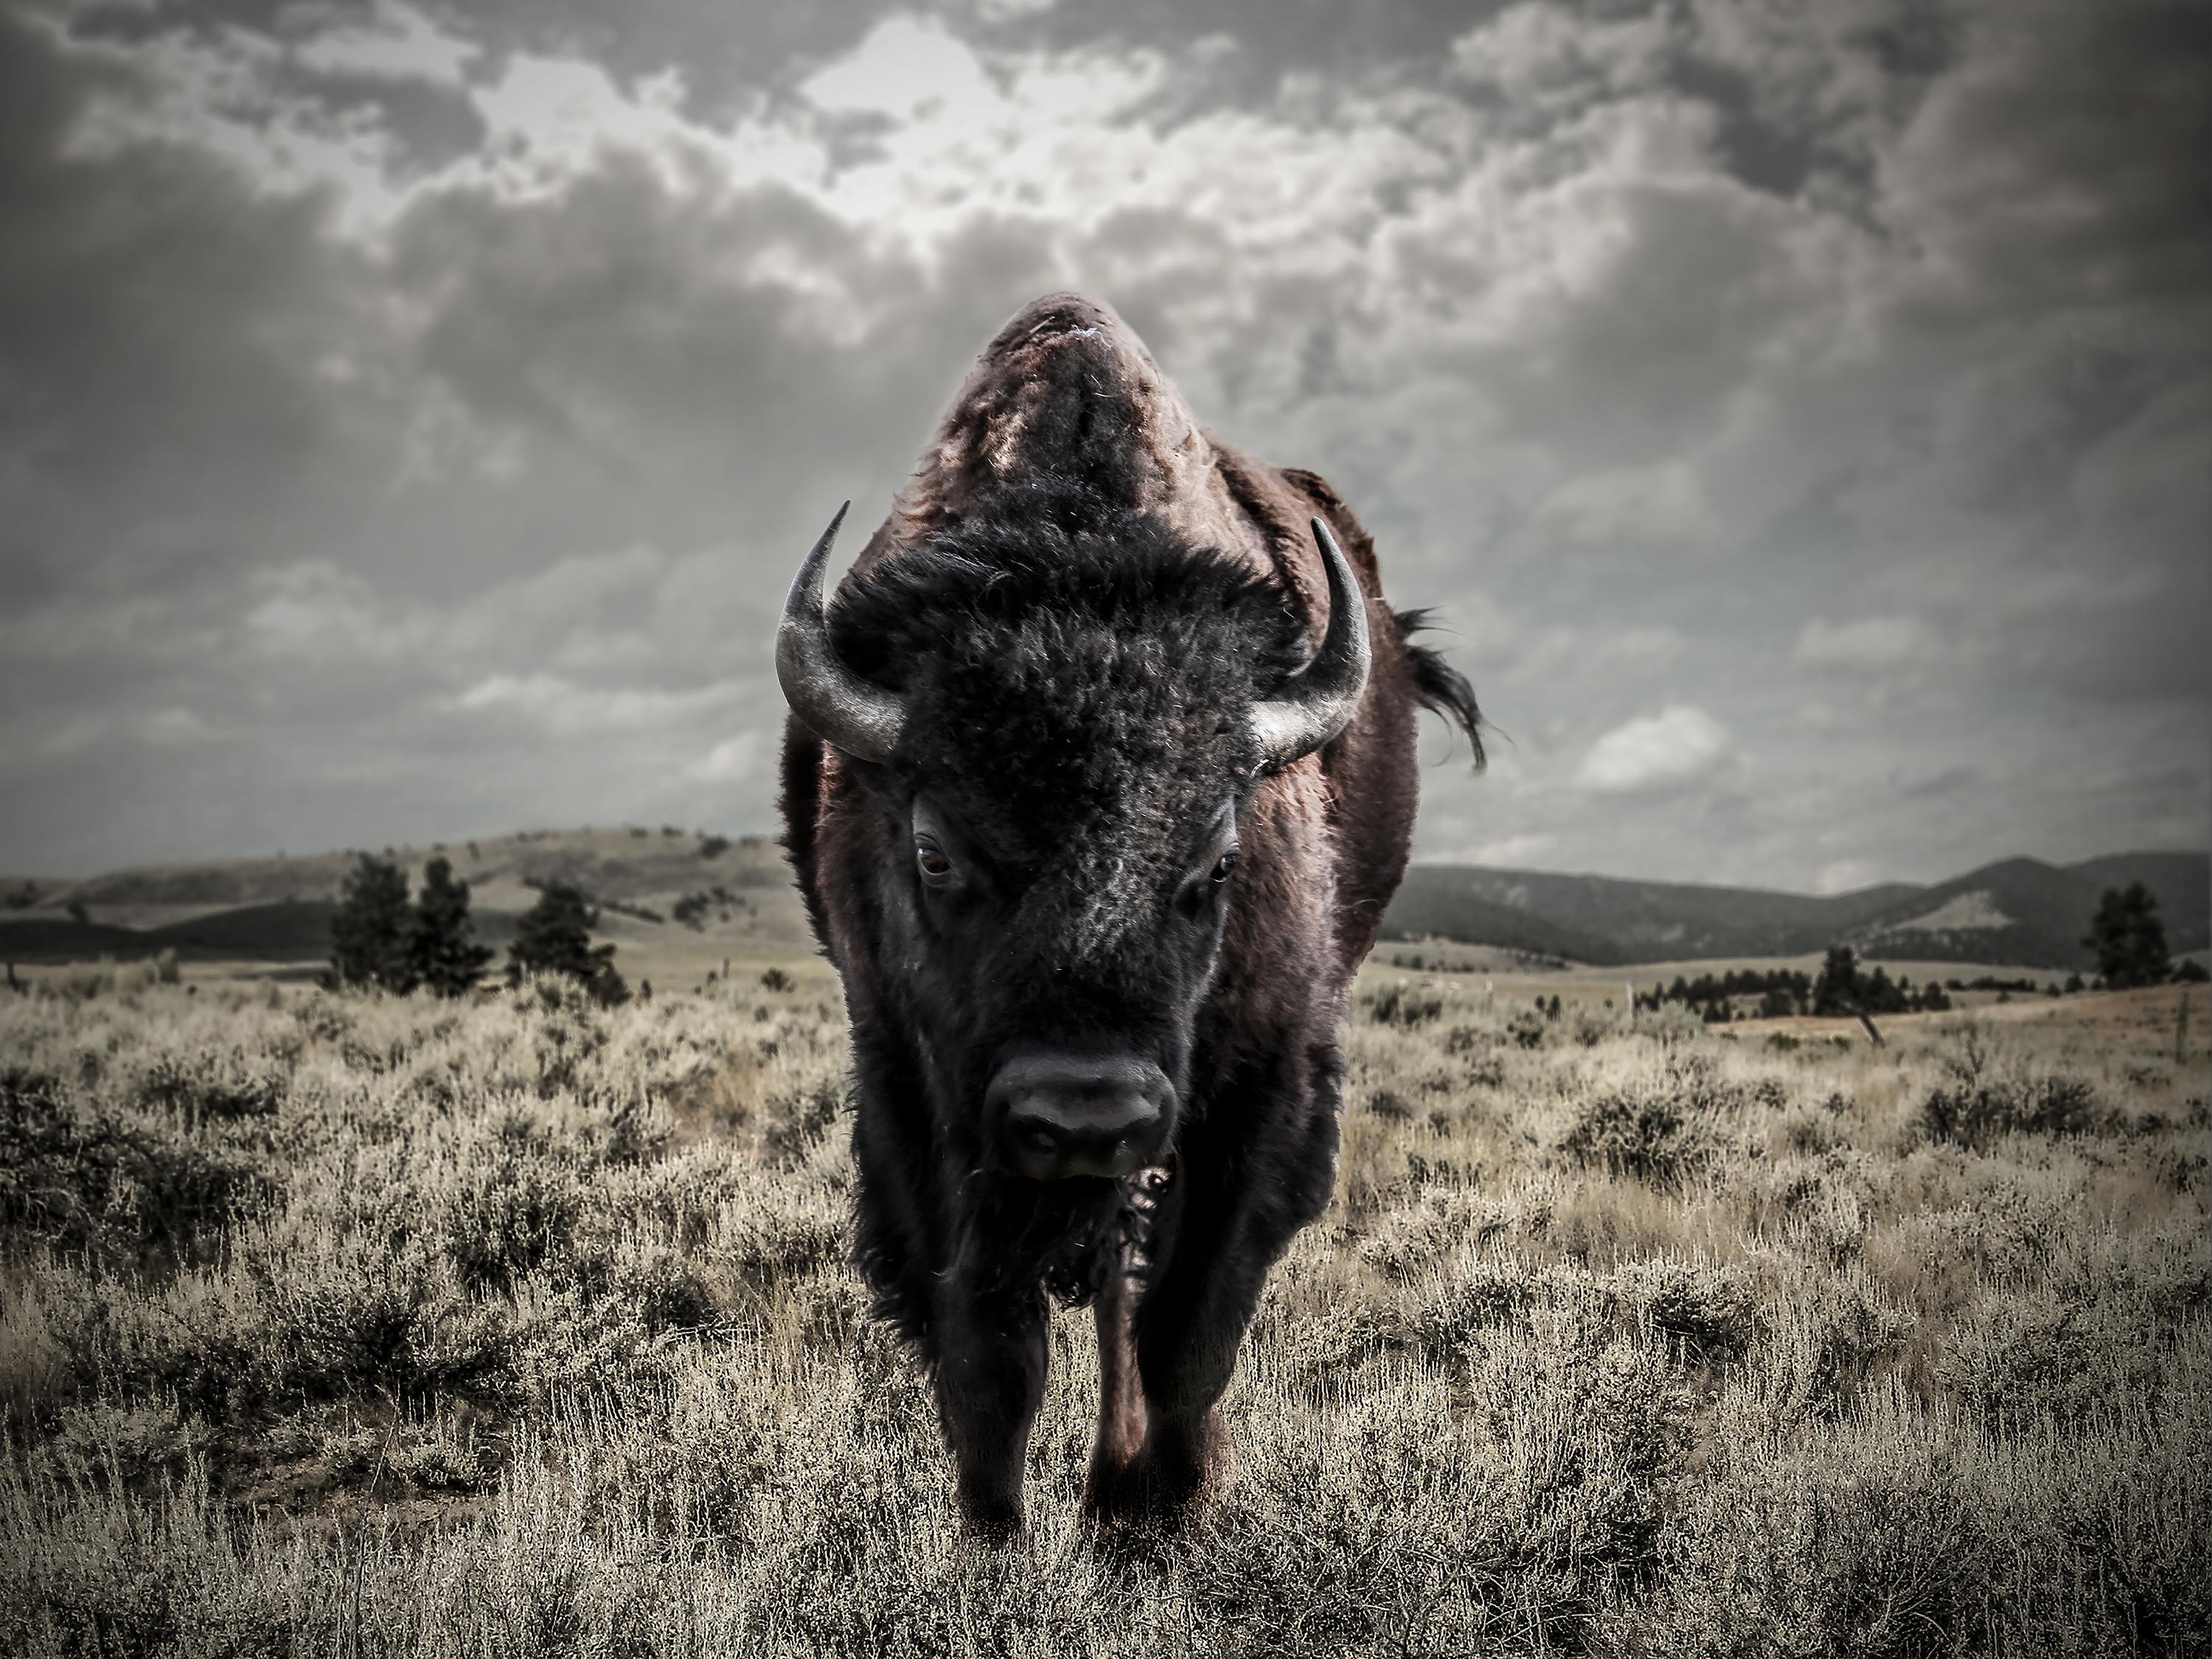 Shane Russeck Animal Print - "Bison" 60x40 -  Photograph, Buffalo, Bison Photography by Unsigned